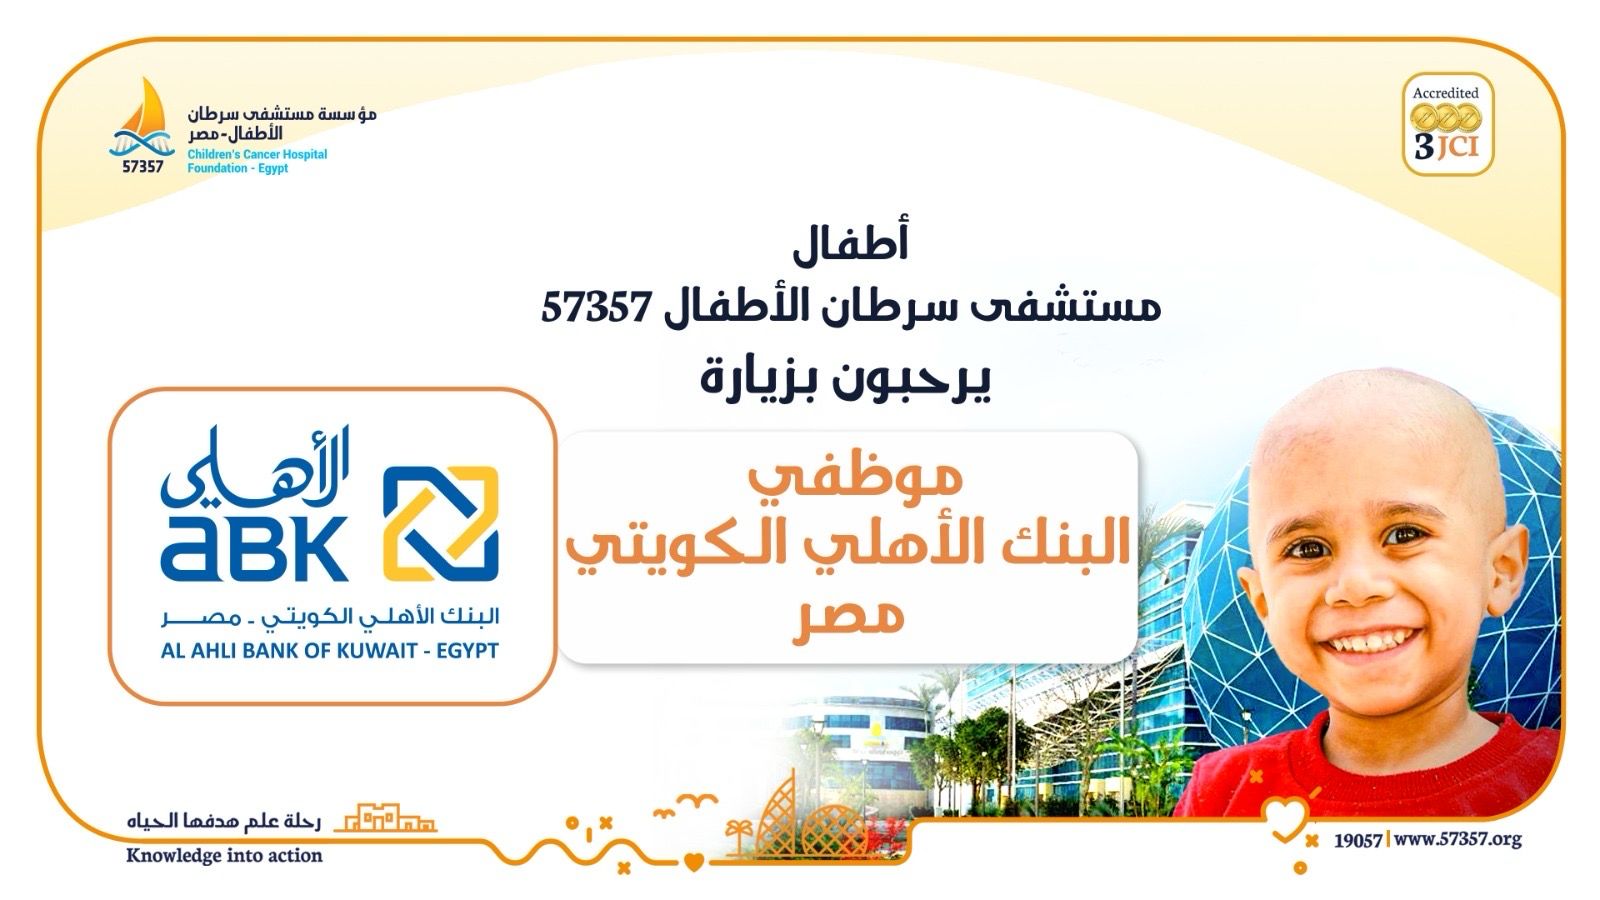 Al Ahli Bank of Kuwait – Egypt Organizes a visit to 57357 Children’s Hospital to decorate the Hospital in celebration of the  Holy month of Ramadan